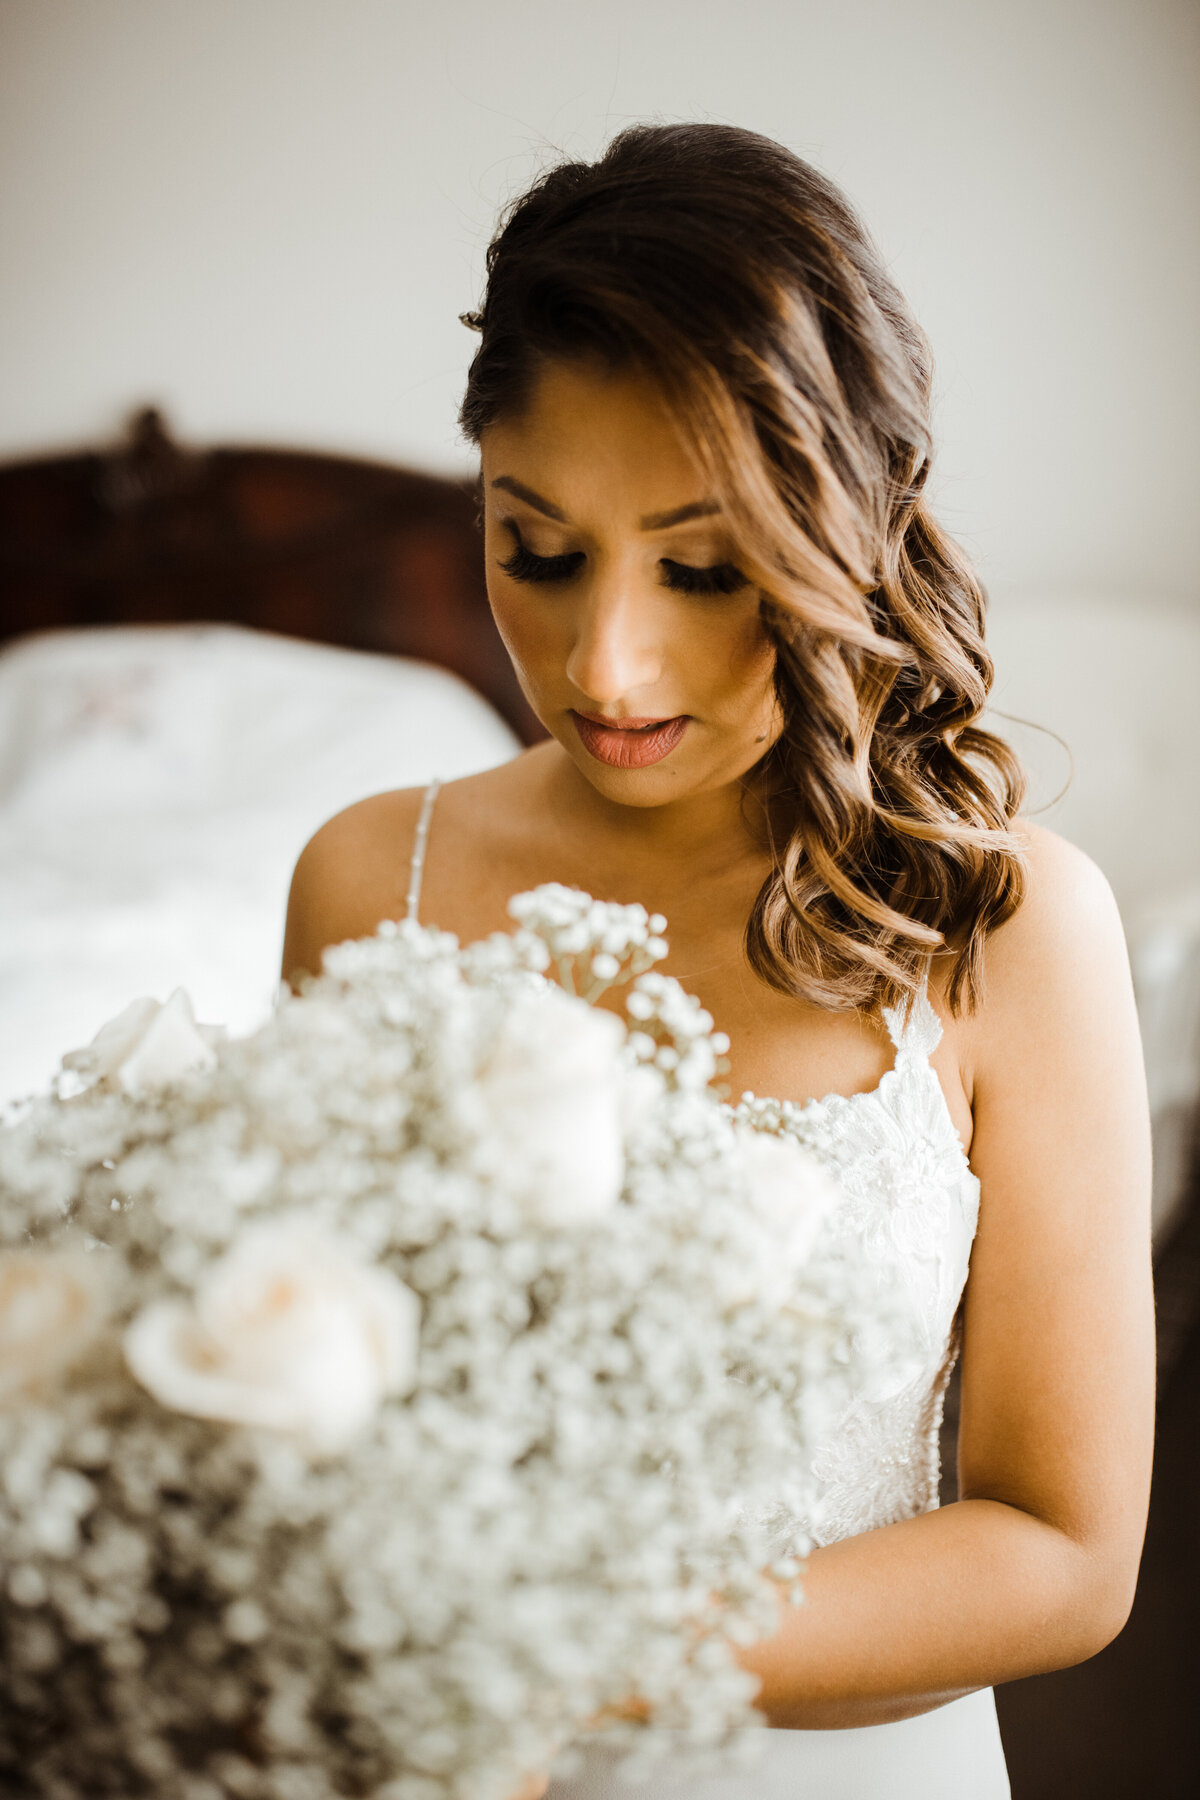 A-markham-home-covid-pandemic-diy-love-is-not-cancelled-wedding-photography-bride-getting-ready-31